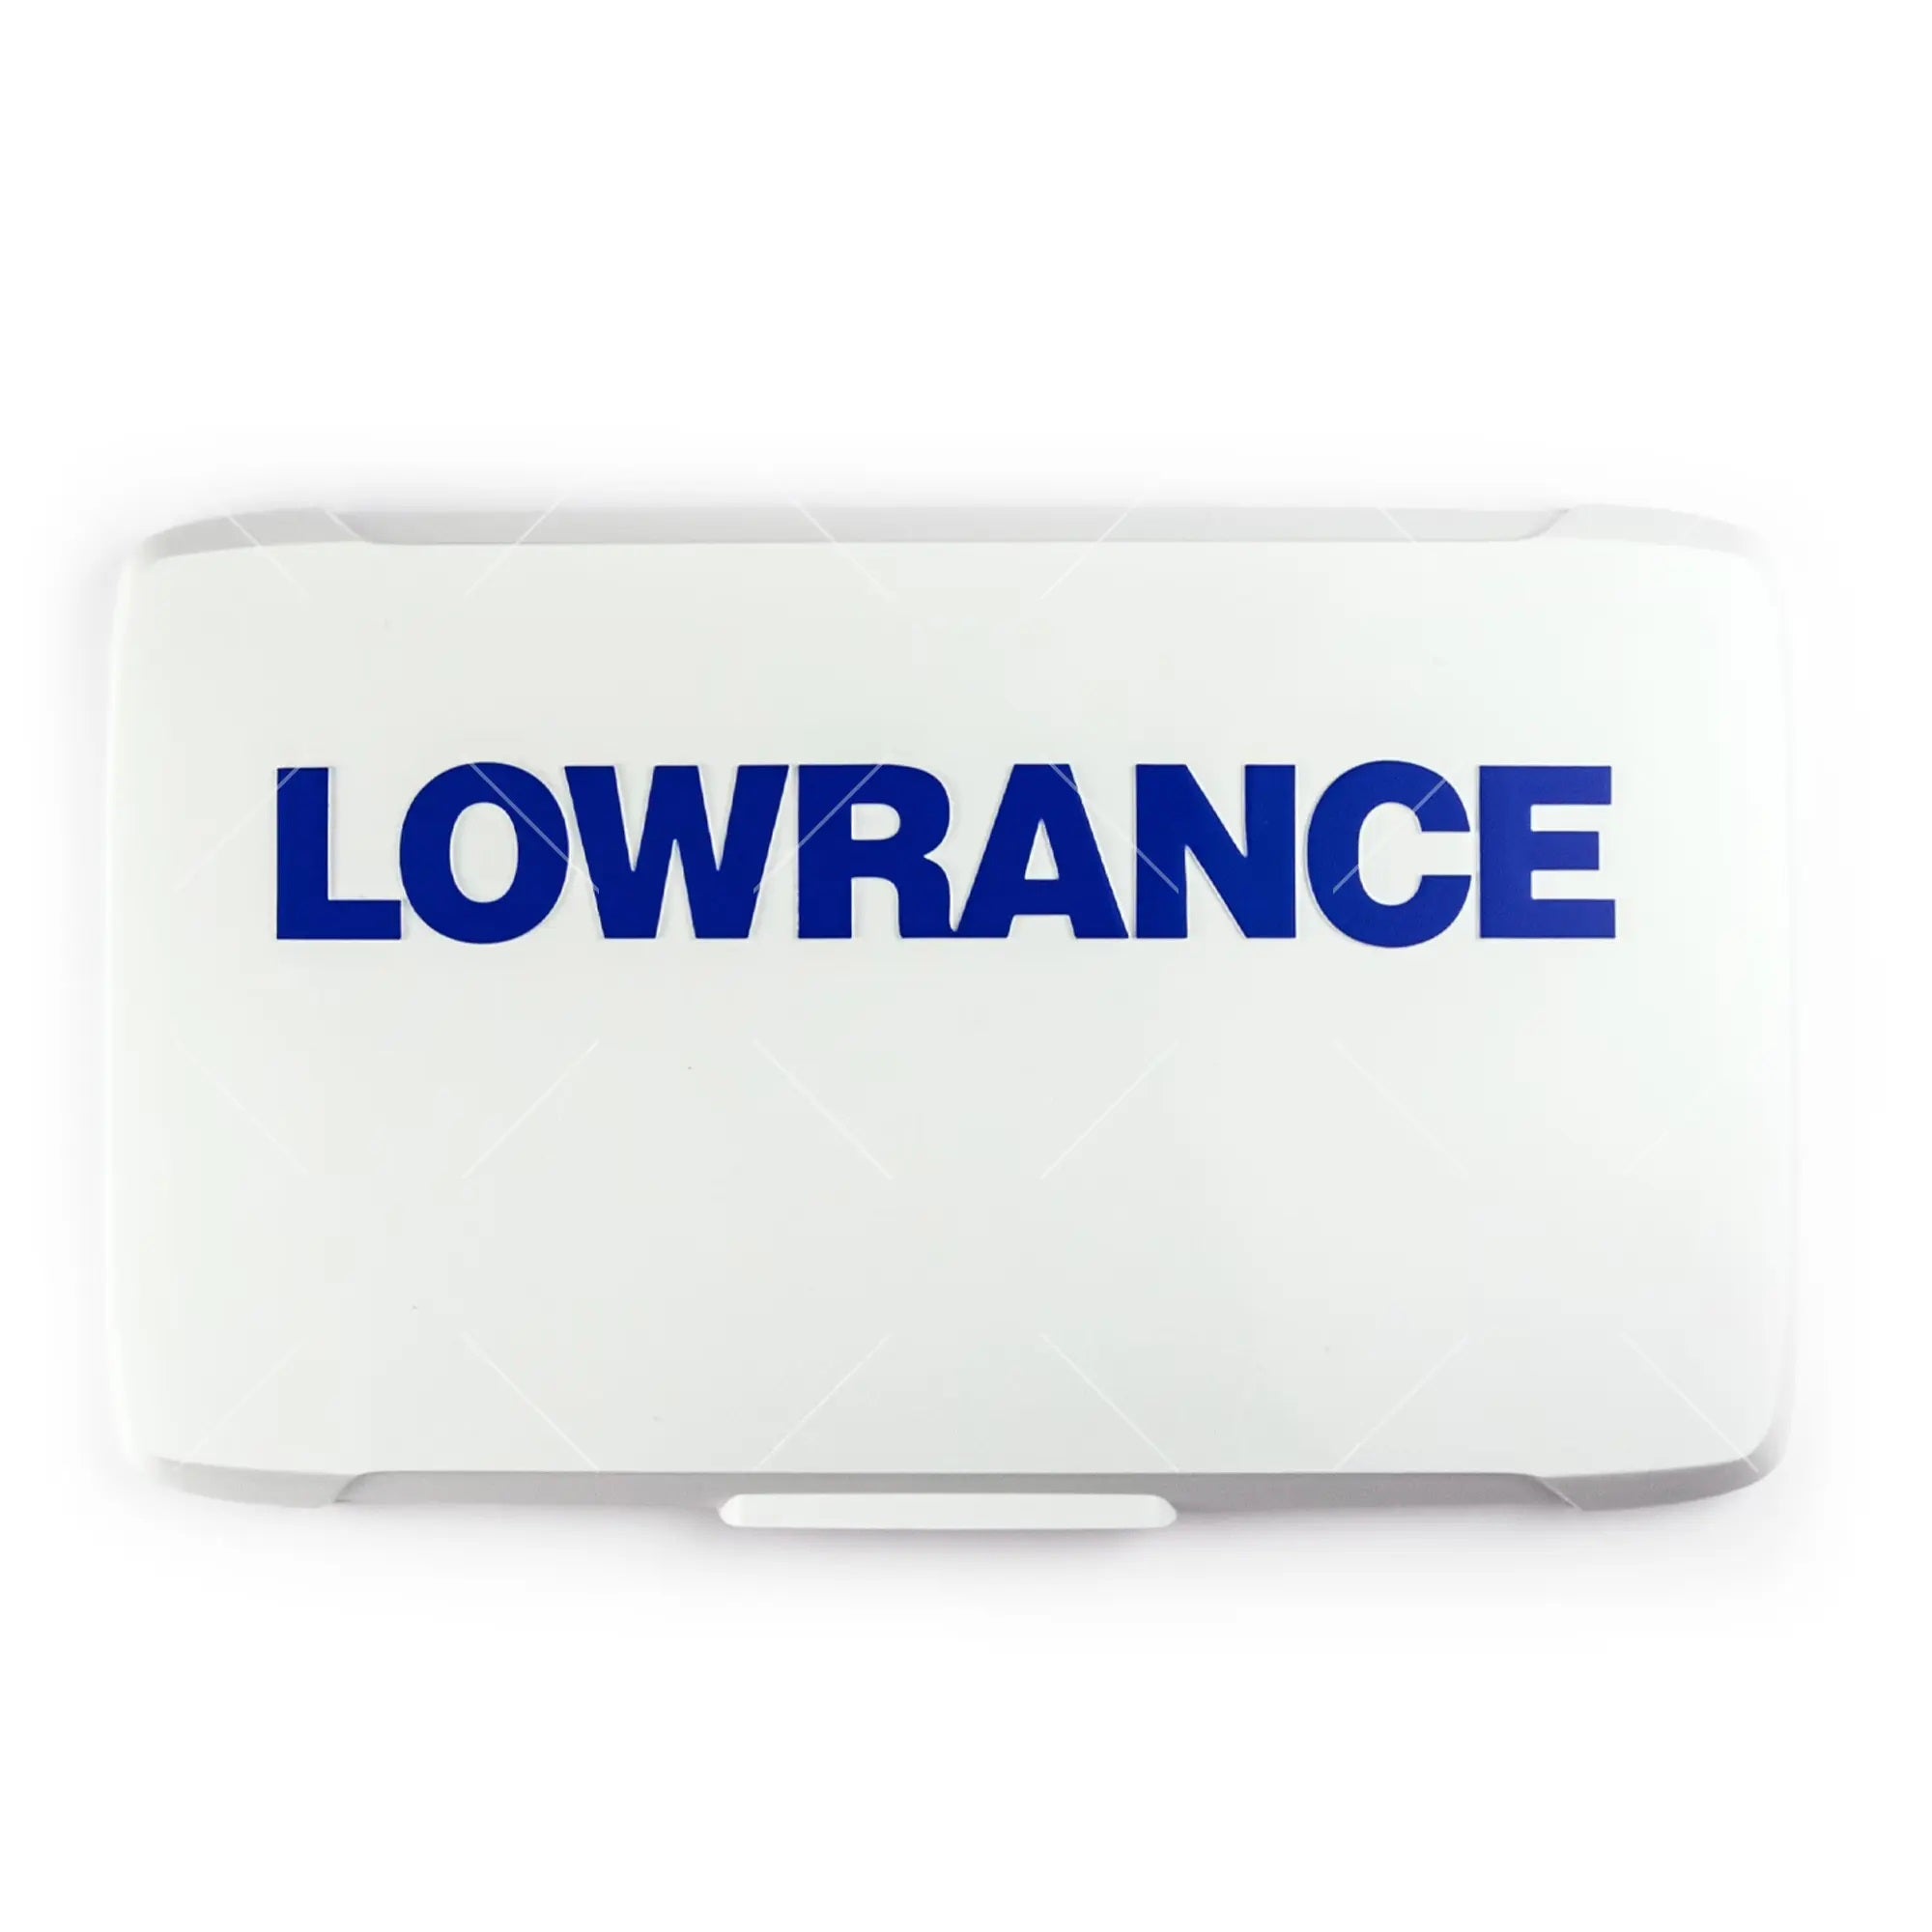 Lowrance 000-16249-001 Sun Cover for Eagle 5